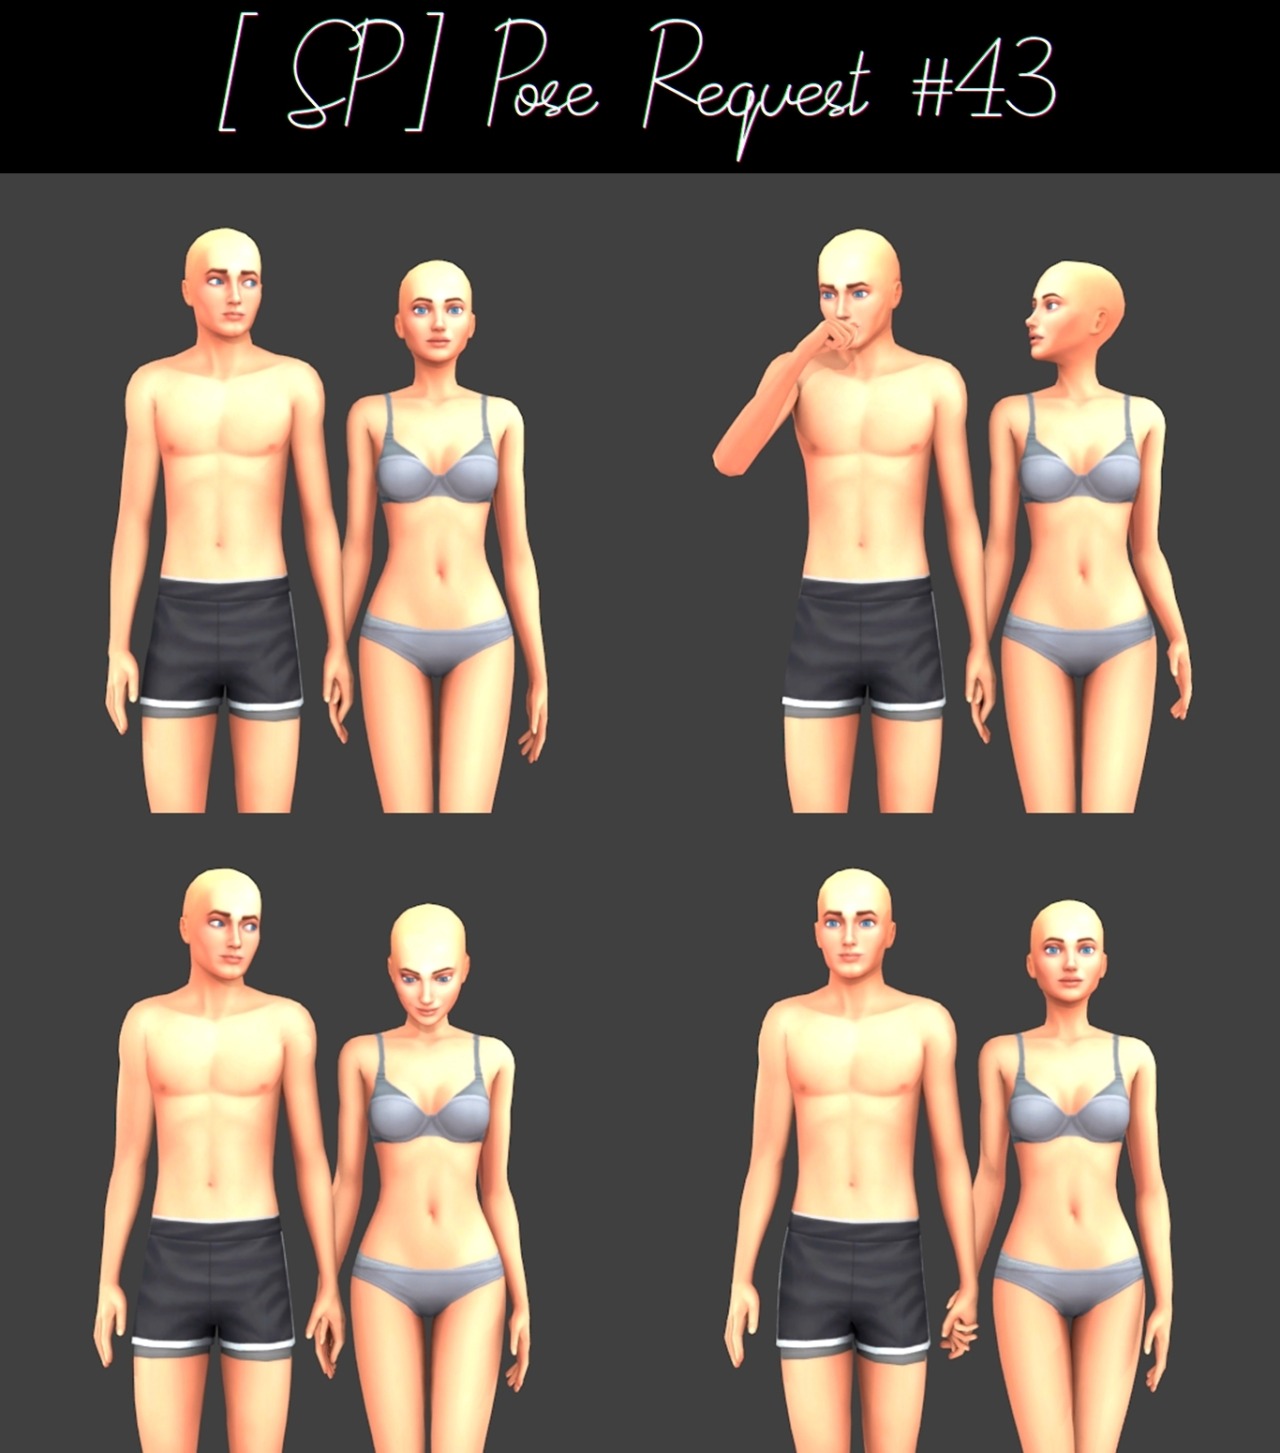 Patreon SIMS 4. Working poses симс 4. Pose request 07 для симс 4. SIMS 4 pose support. Патрион симс 4 мод